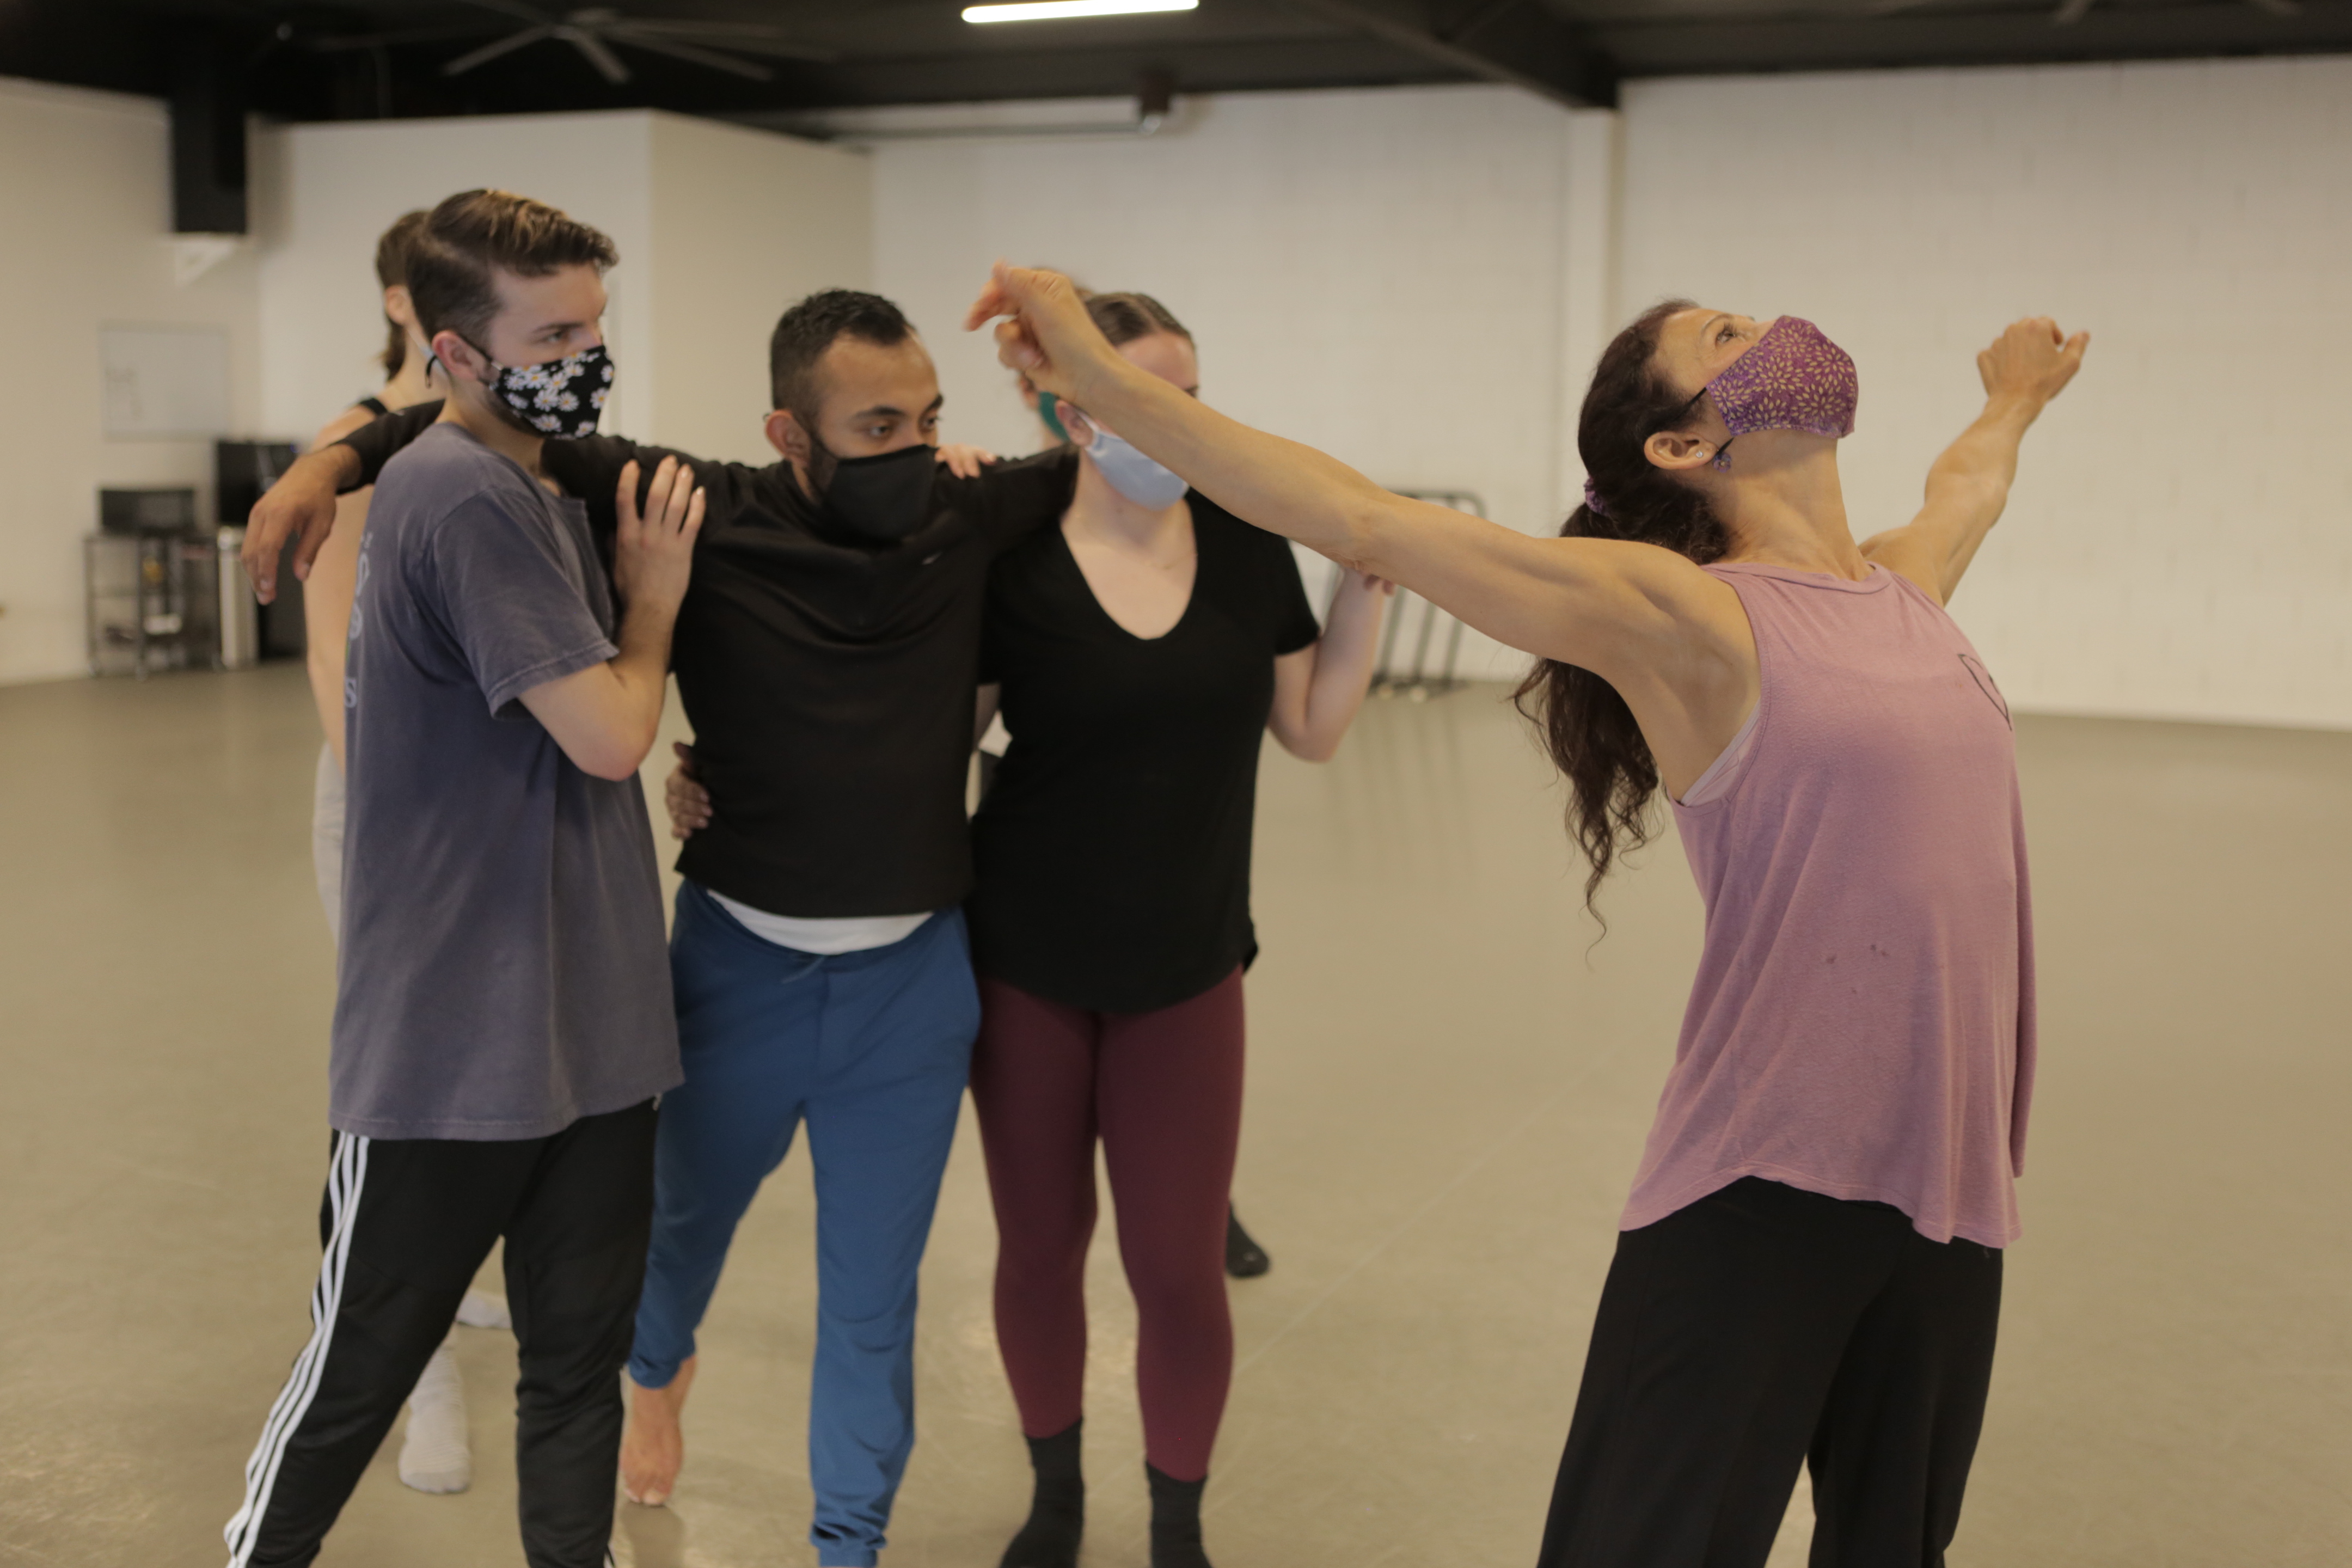 In-studio rehearsal photo of sjDANCEco Co-Artistic Director Maria Basile (in pink shirt) demonstrating movement from Yield to her dancers. Dancers (left to right) are: Ryan Tucker, Kevin Gaytan and Kyleigh Carlson. Photo by Tom Hassing courtesy of sjDANCEco.